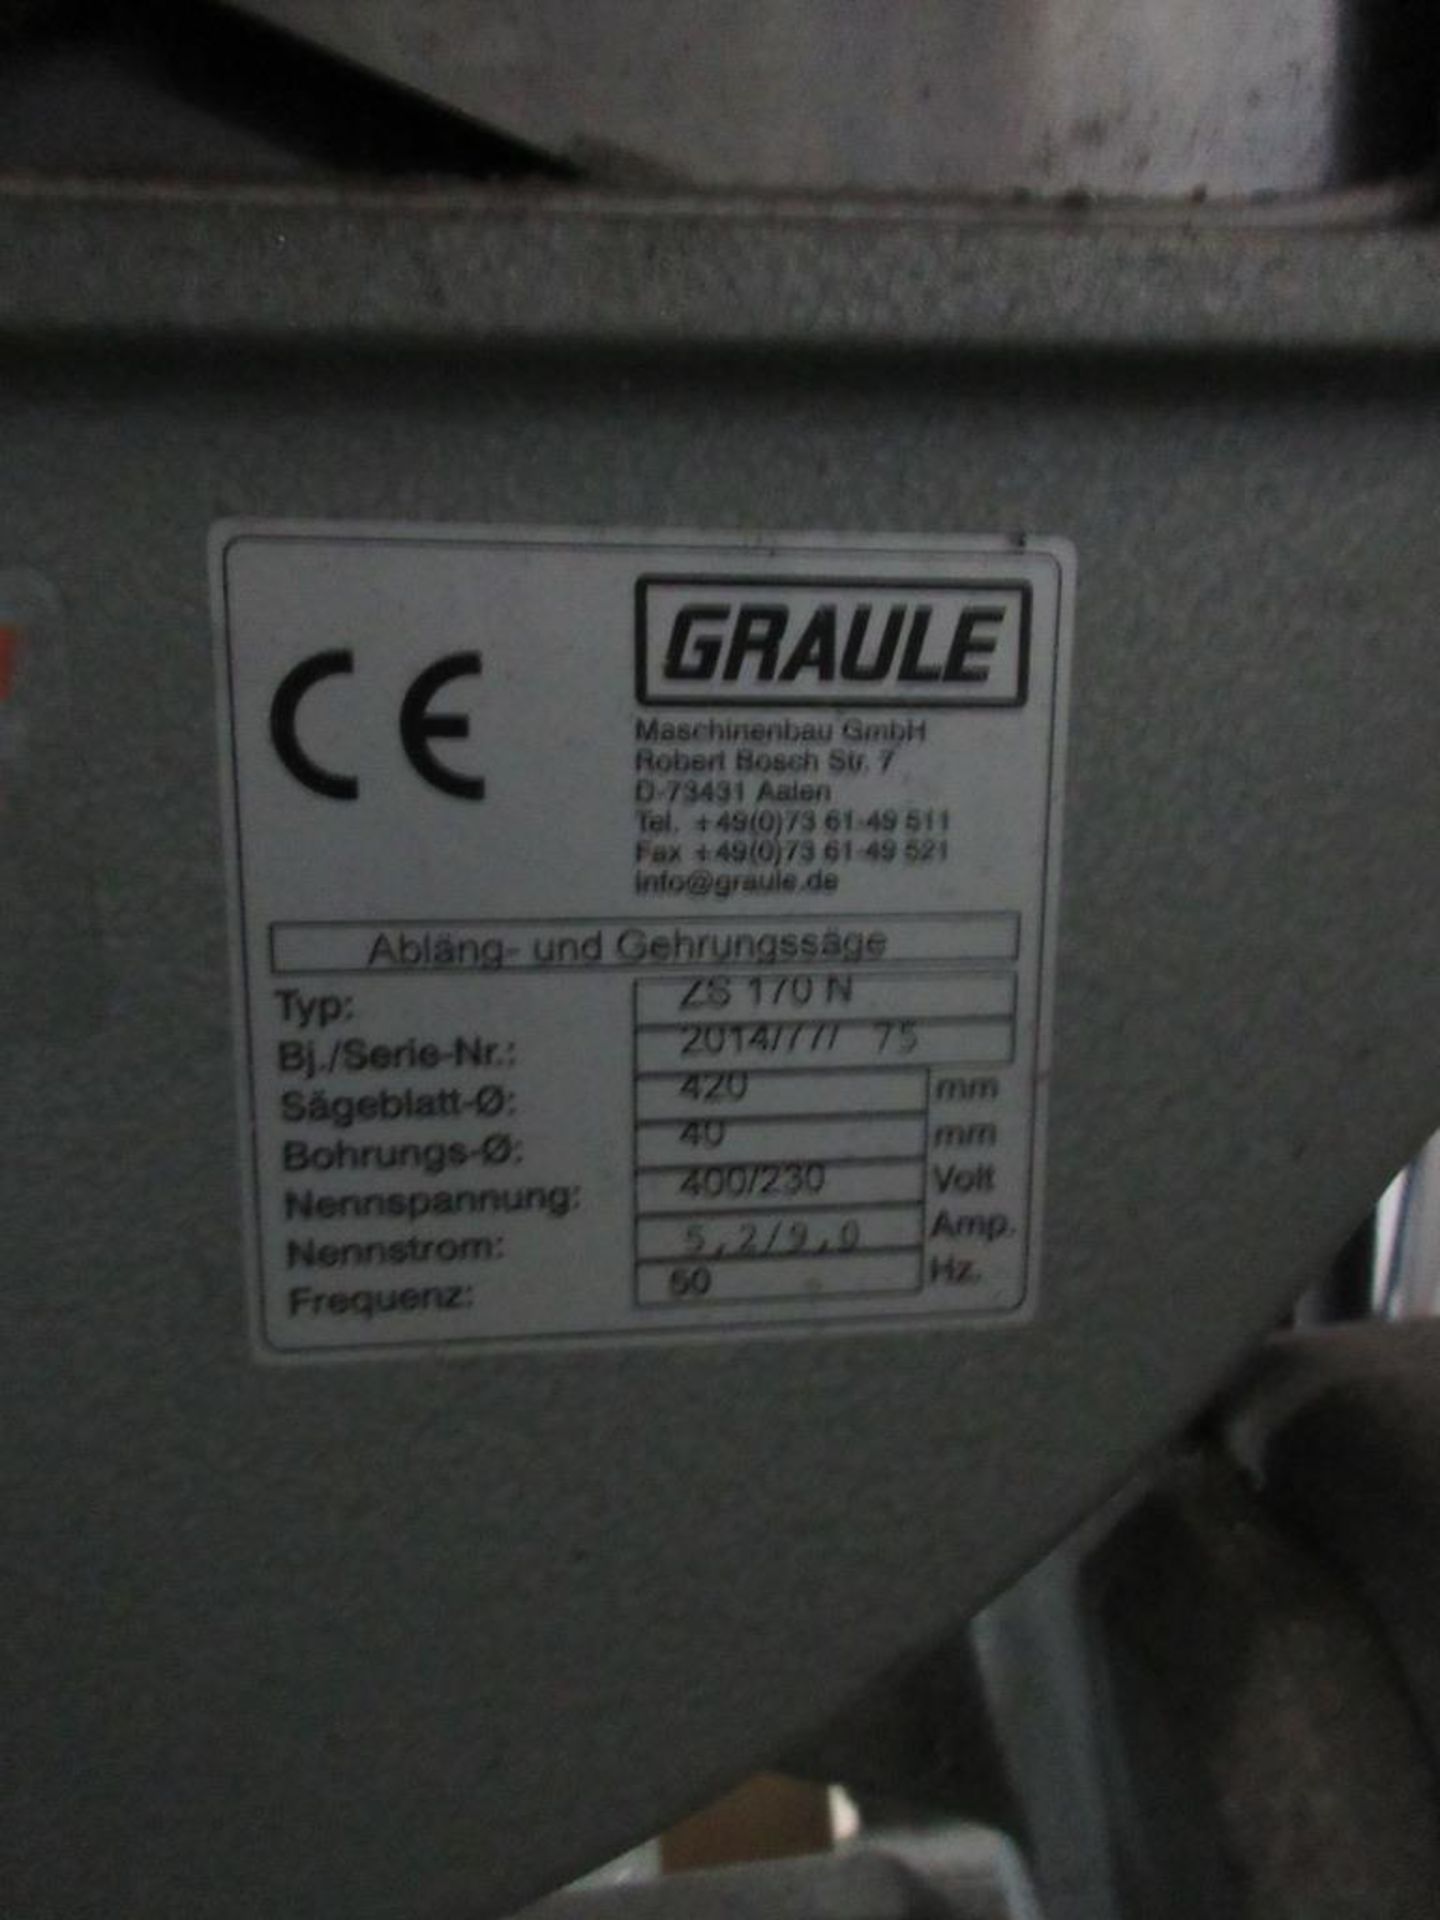 Graule 420mm adjustable cross cut saw, serial no 2014/77175, laser marker, approx. bed size 800 x - Image 3 of 5